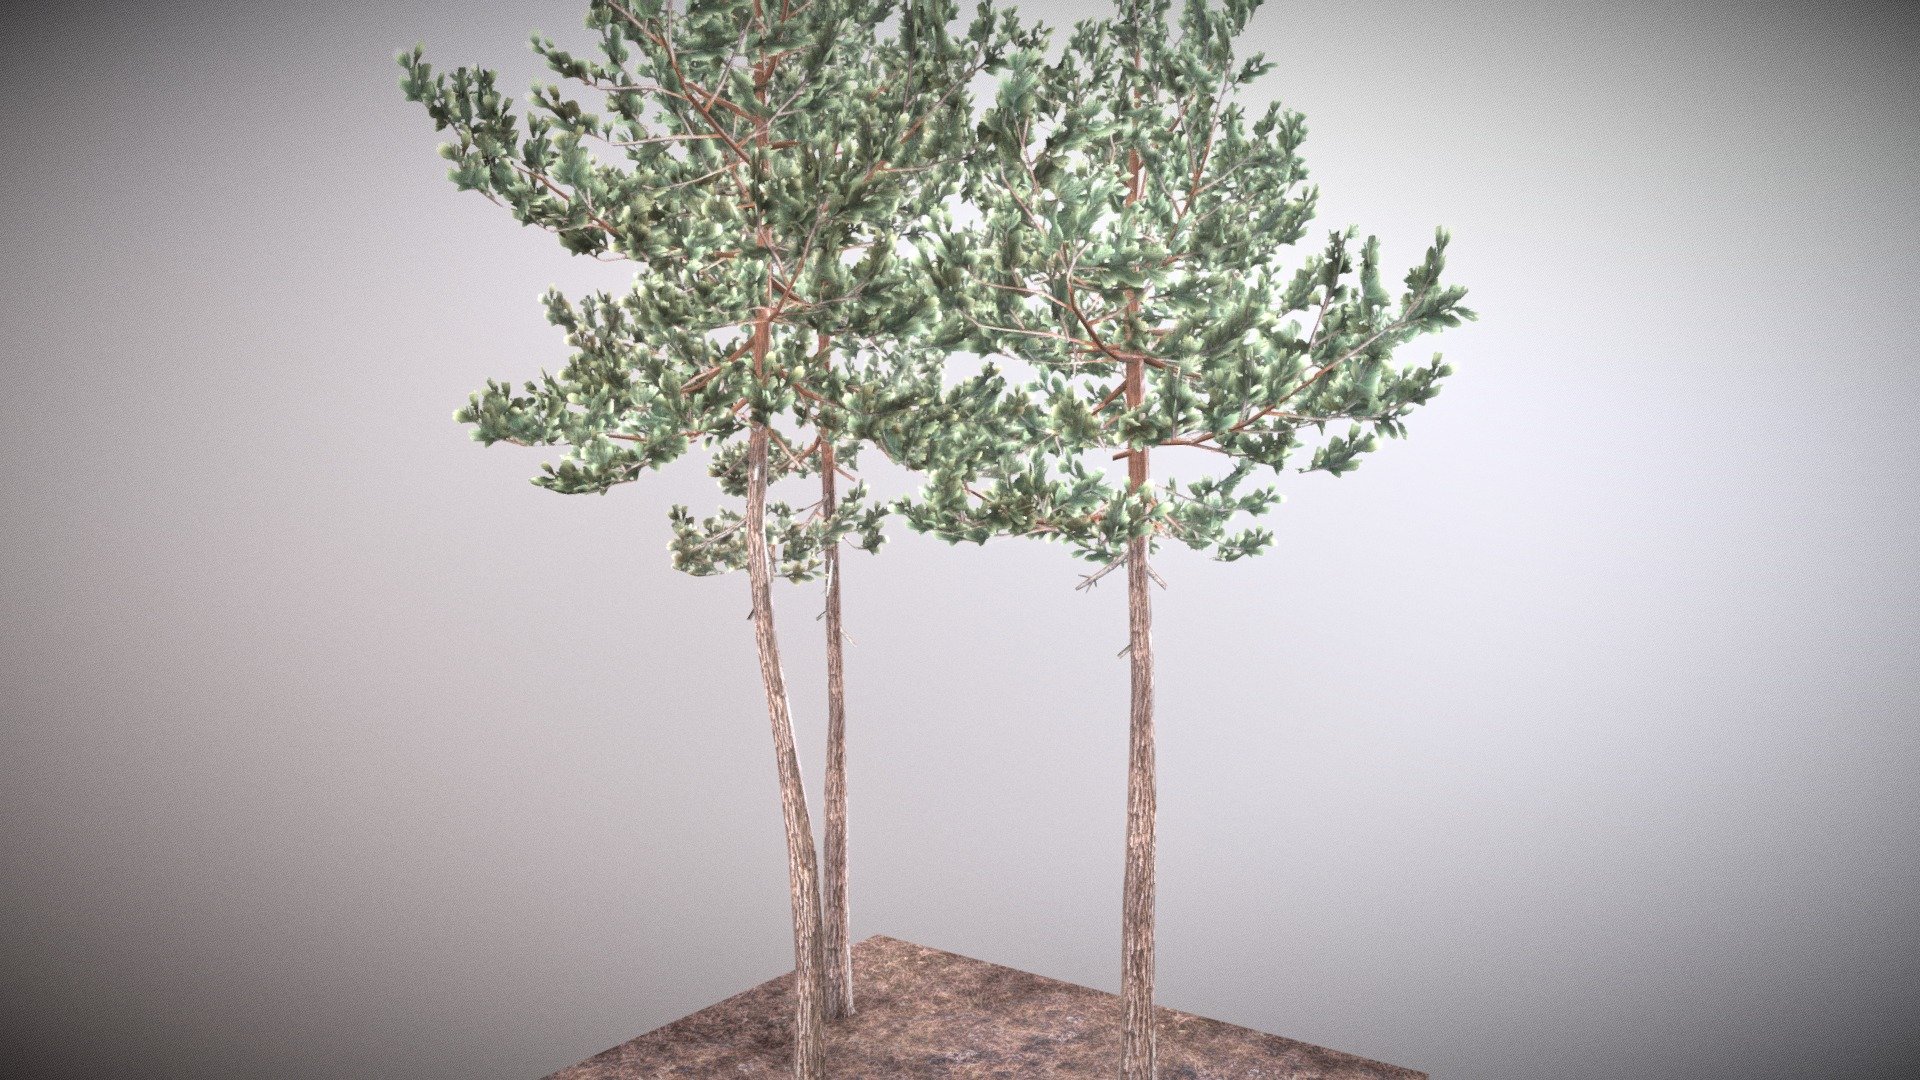 Scots Pines - Pinus Sylvestris

Low-poly trees for games. 

Scots pine, Scotch pine or Baltic pine, is a species of tree in the pine family Pinaceae. Ranging from Western Europe to Eastern Siberia, it occurs from sea level to 3,300 ft, while in the south of its range it is a mountain tree, growing at 3,900–8,500 ft altitude. It is readily identified by its combination of fairly short, blue-green leaves and orange-red bark 3d model